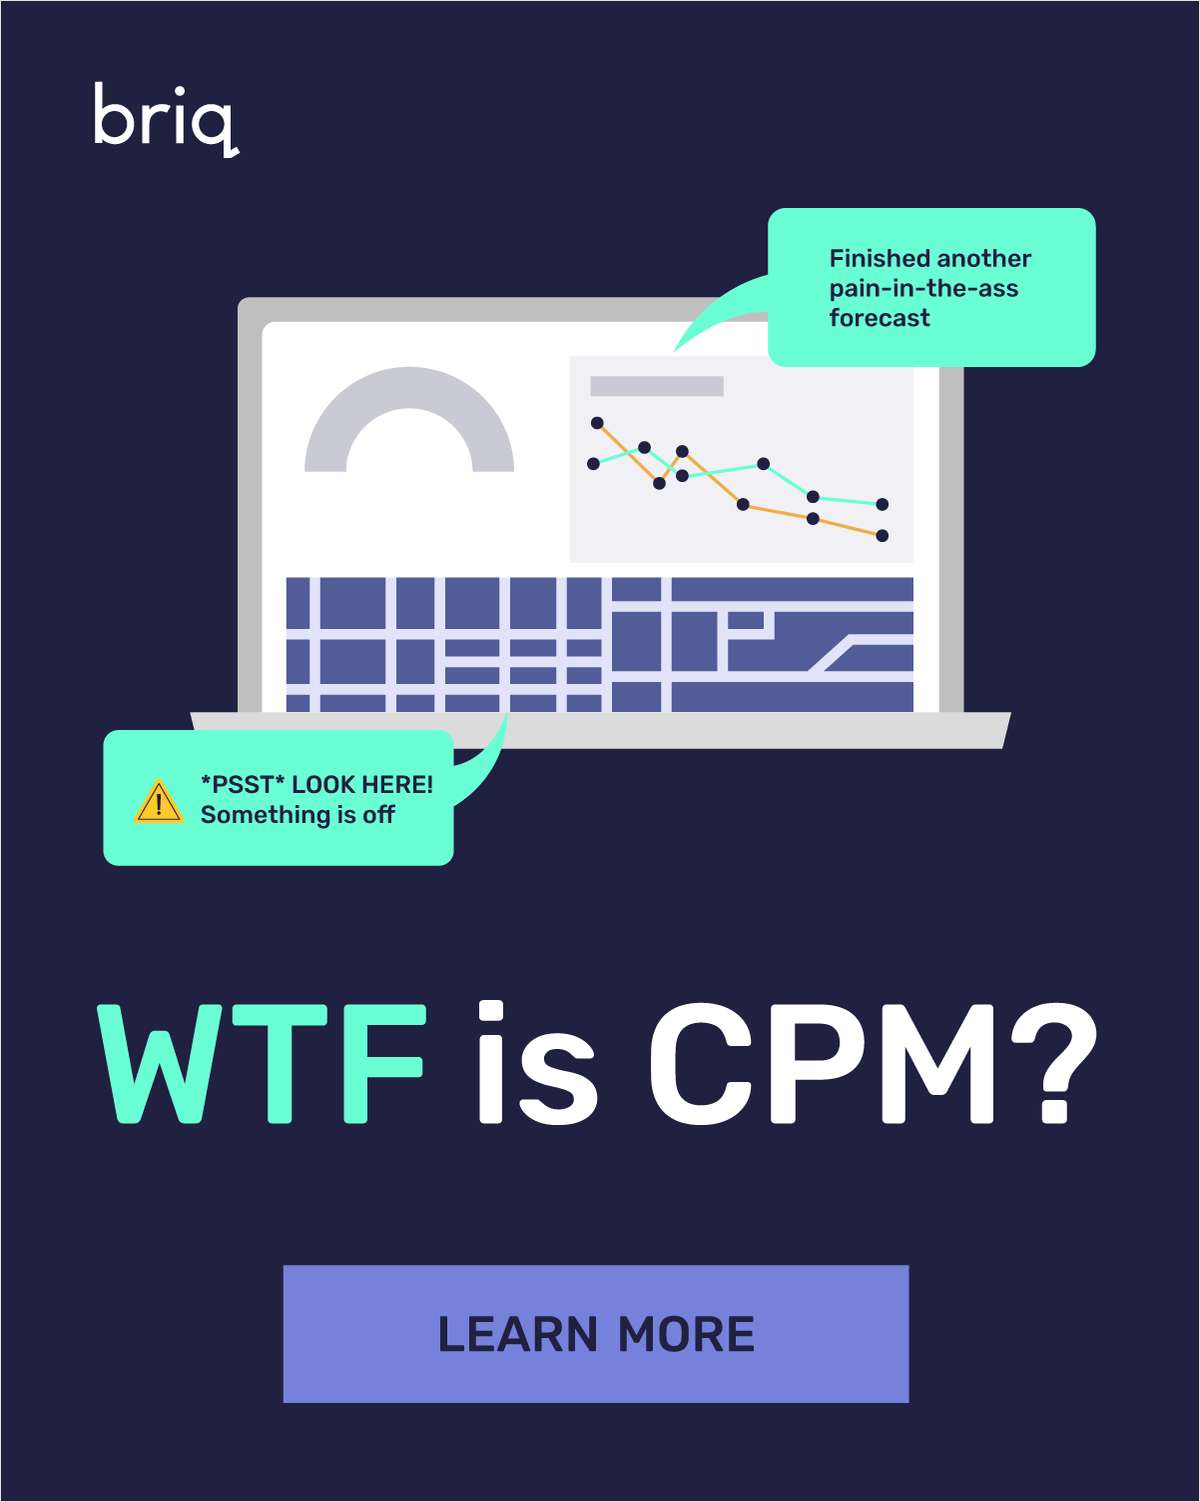 WTF is CPM for Construction Financial Professionals?